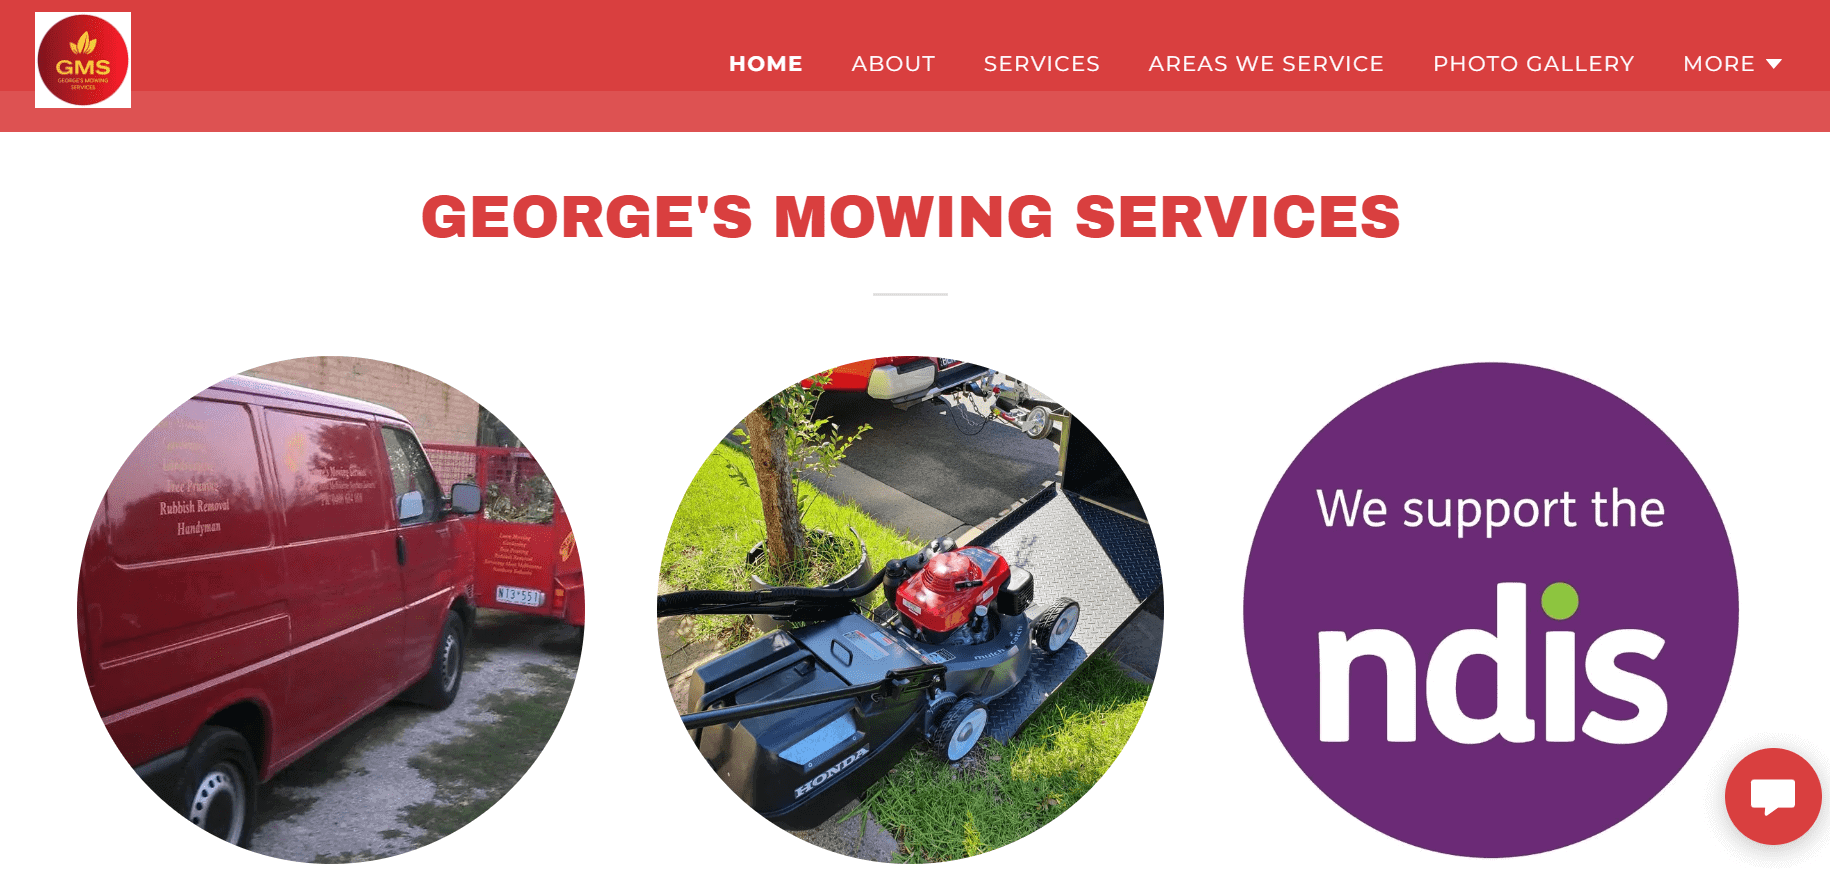 georges mowing services